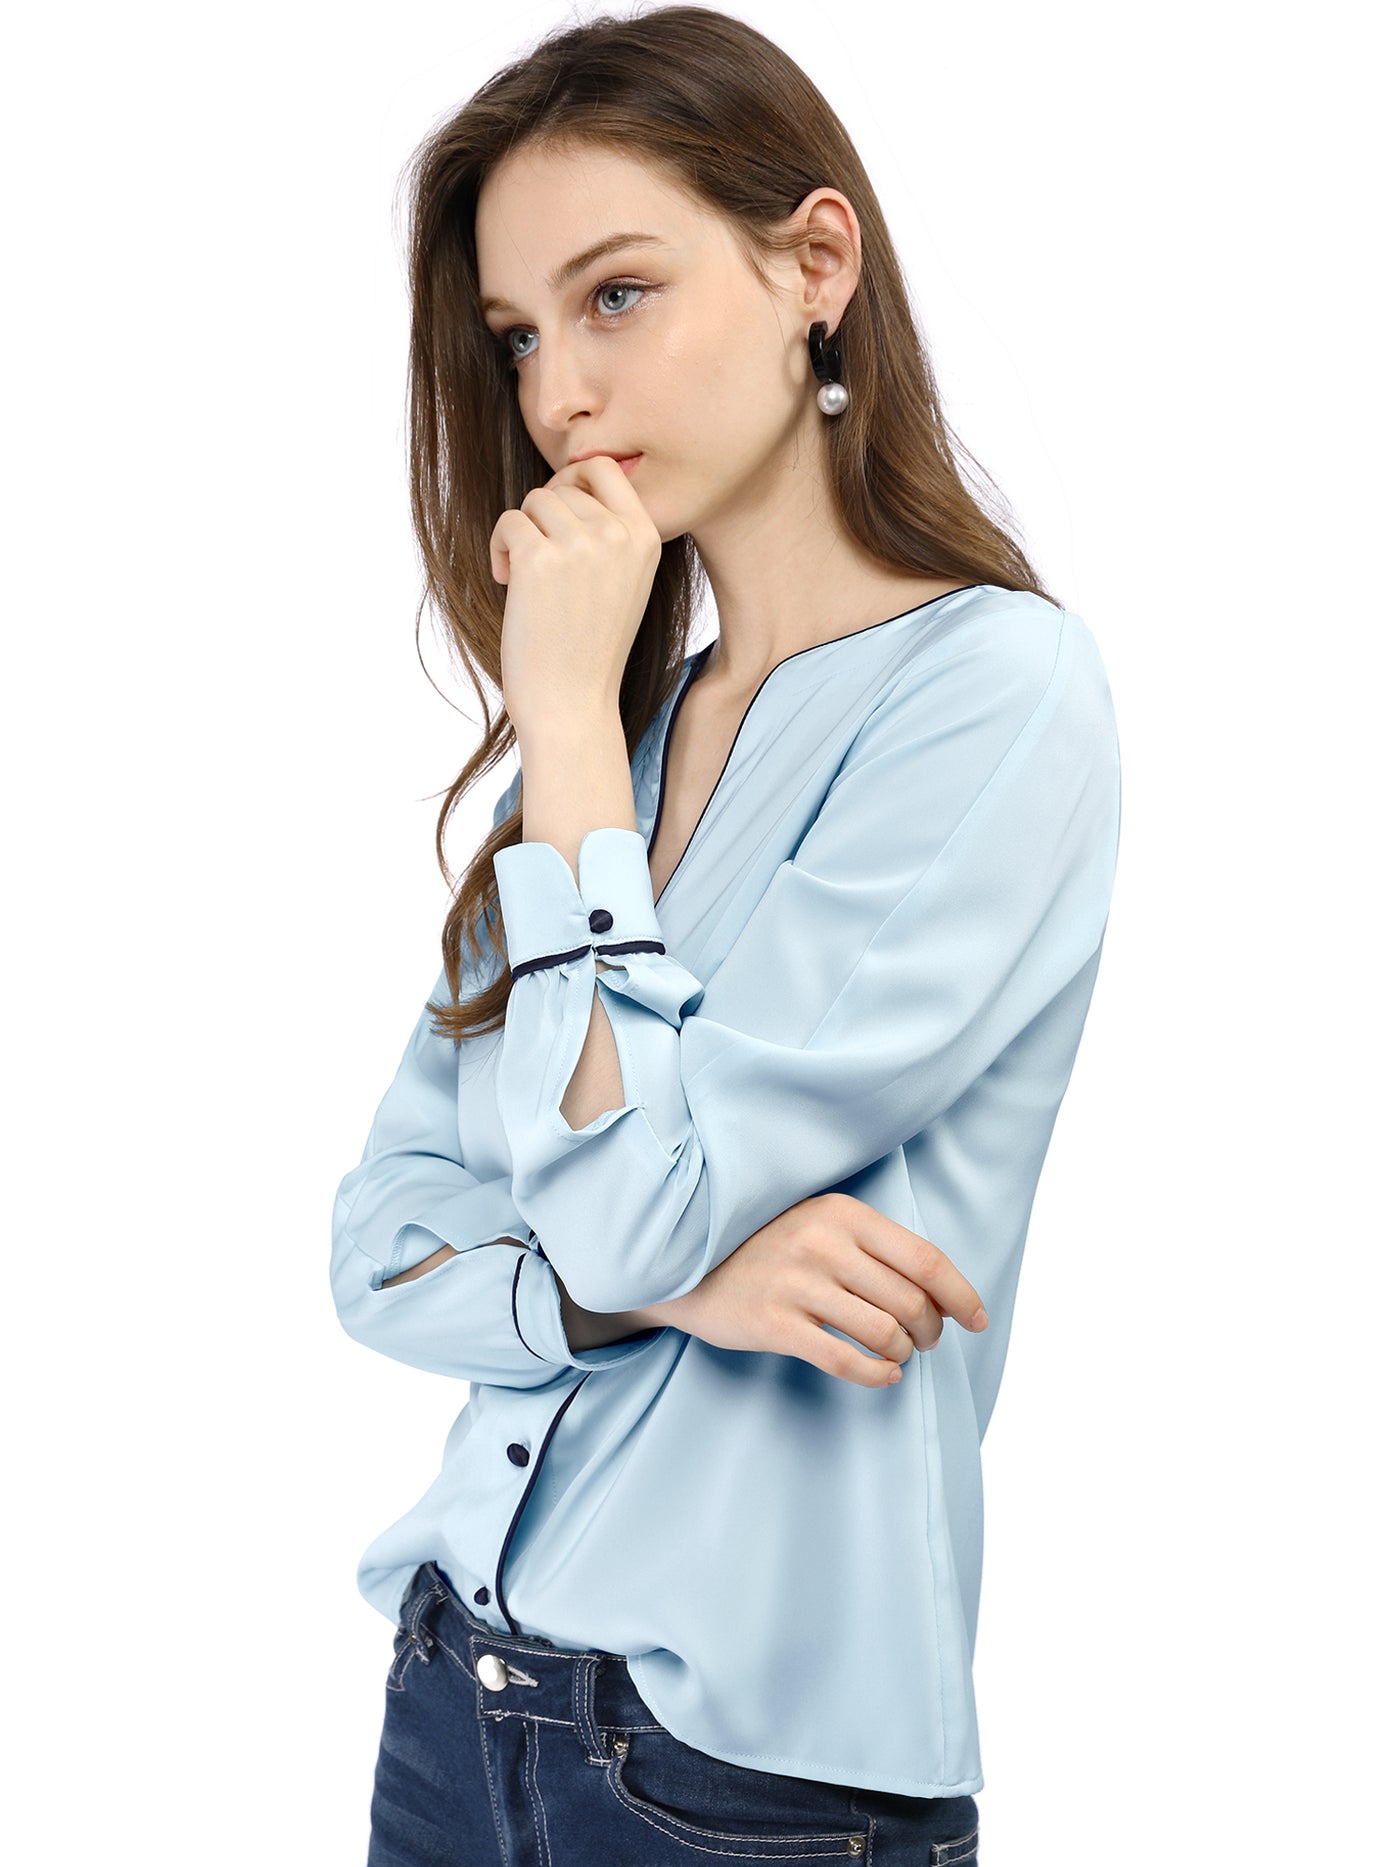 Allegra K V Neck Long Sleeve Contrast Color Piped Button Up Chiffon Blouse